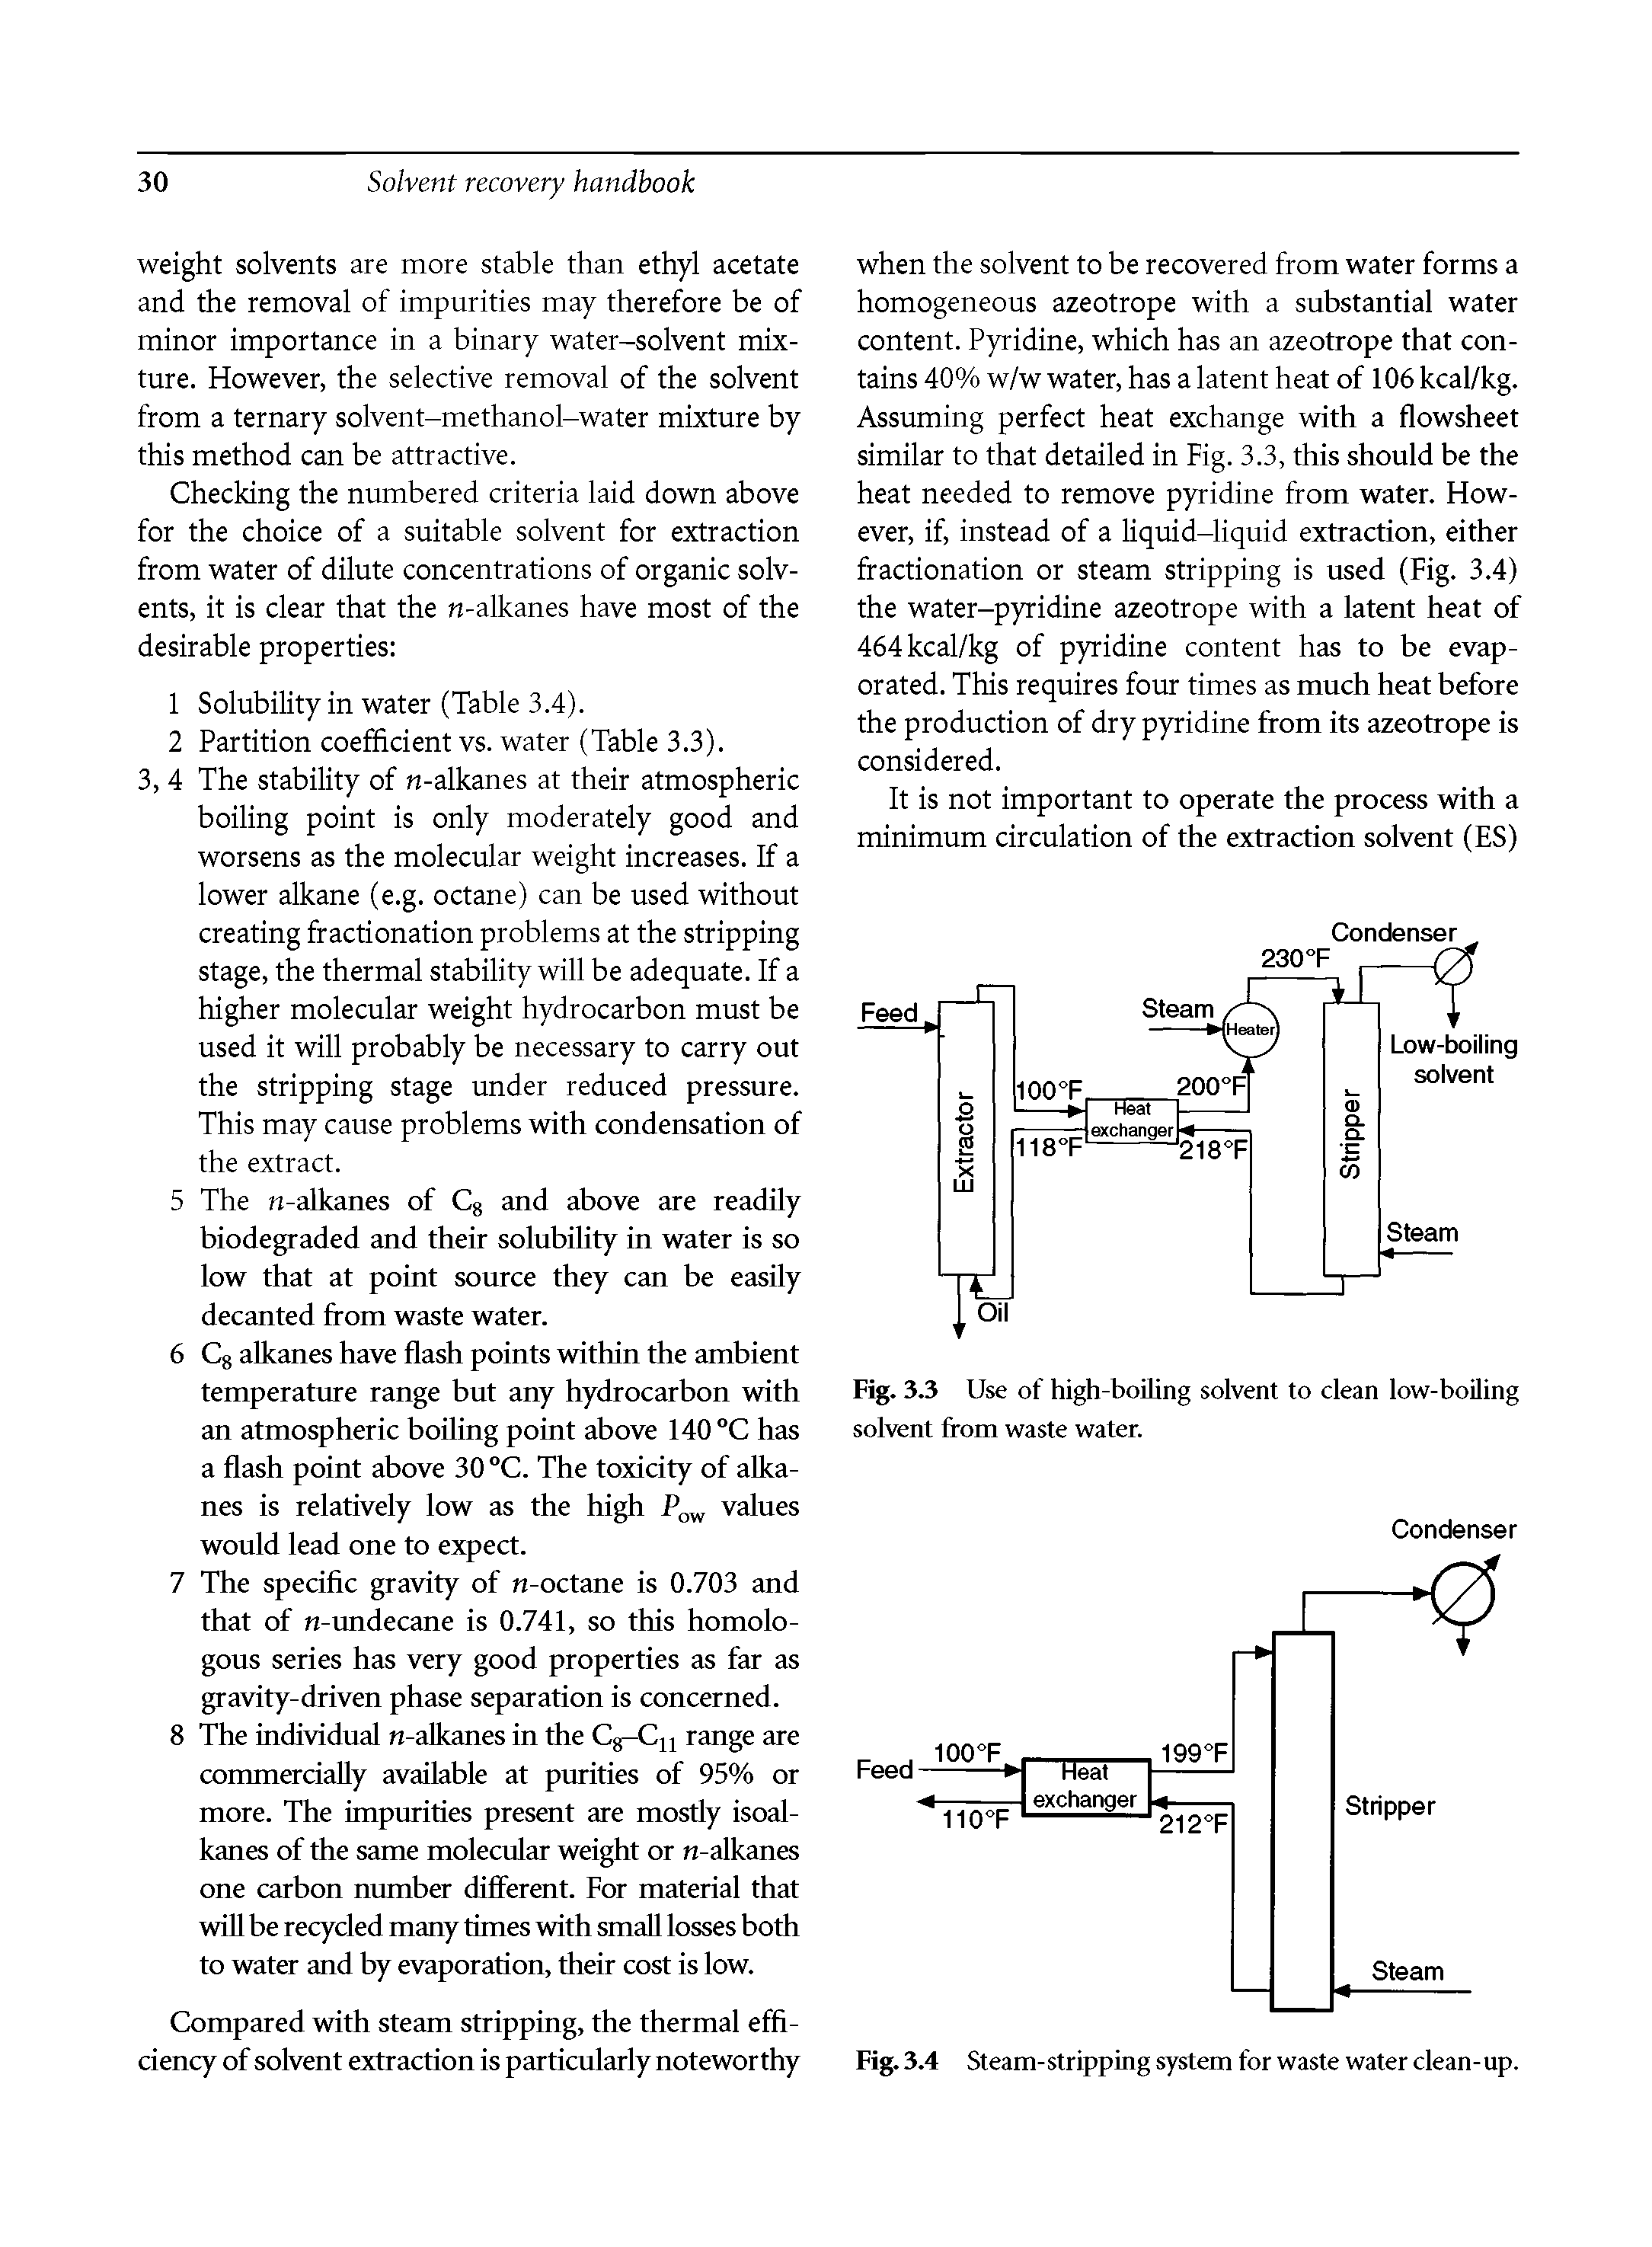 Fig. 3.4 Steam-stripping system for waste water clean-up.